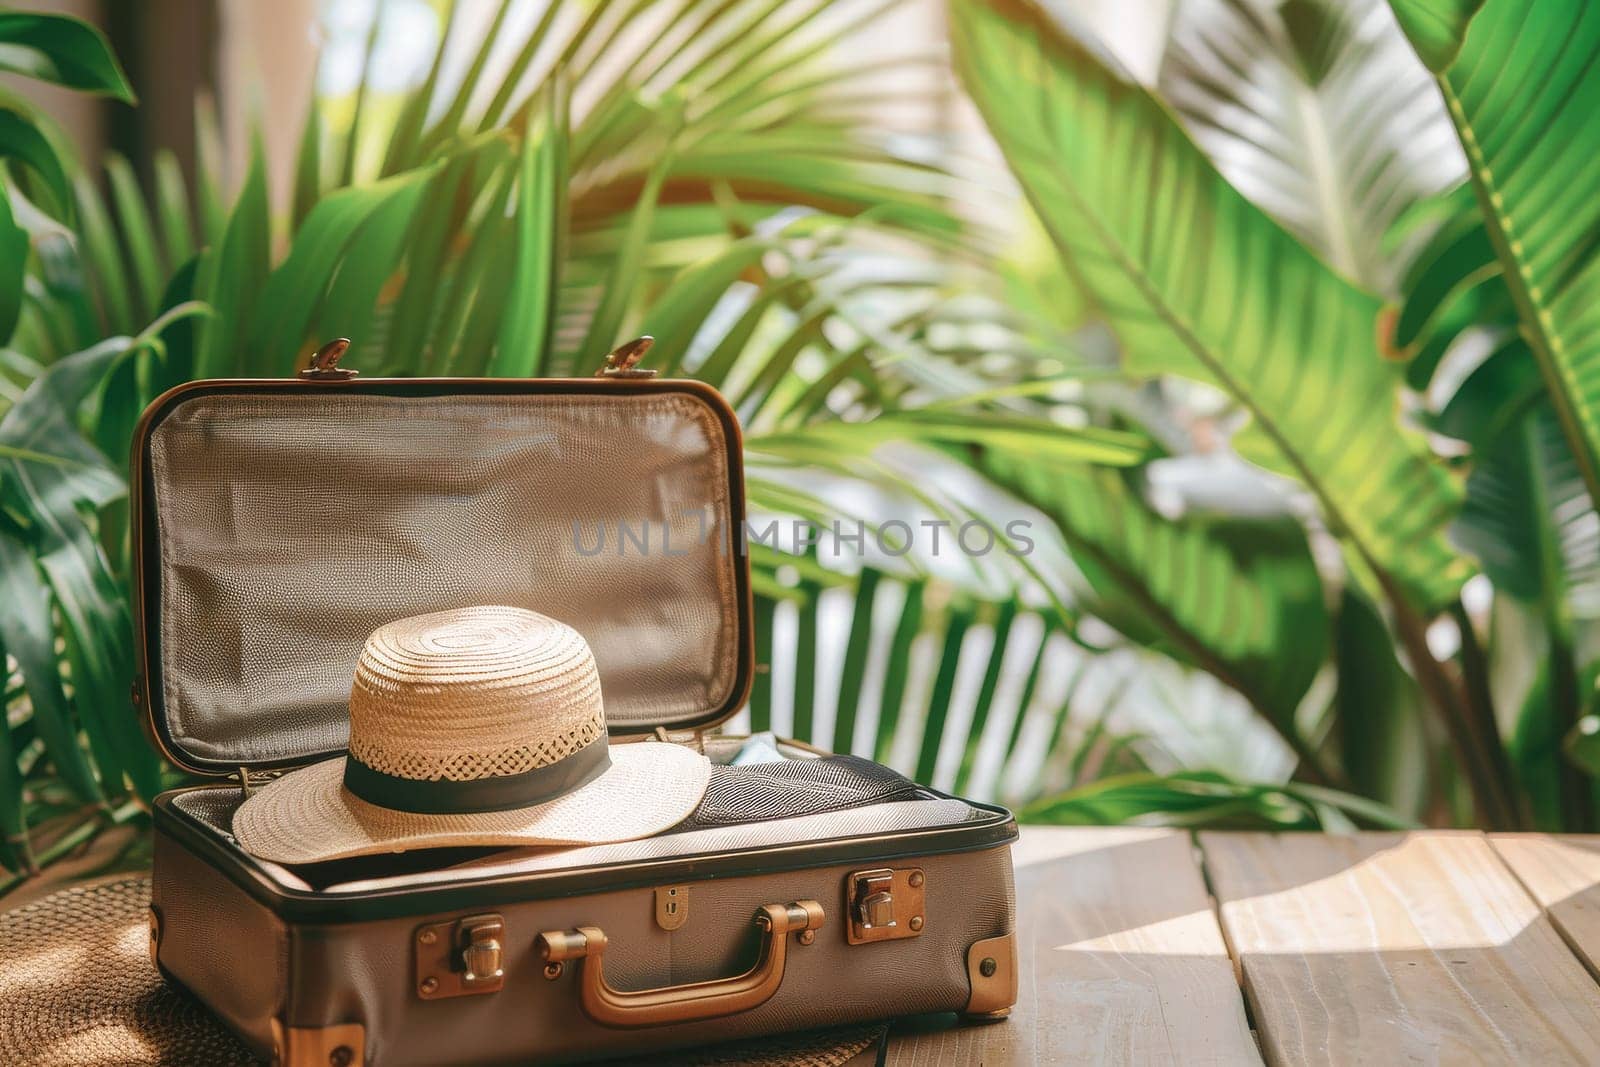 traveler suitcase and hat on summer holidays Background, summer travel trip.